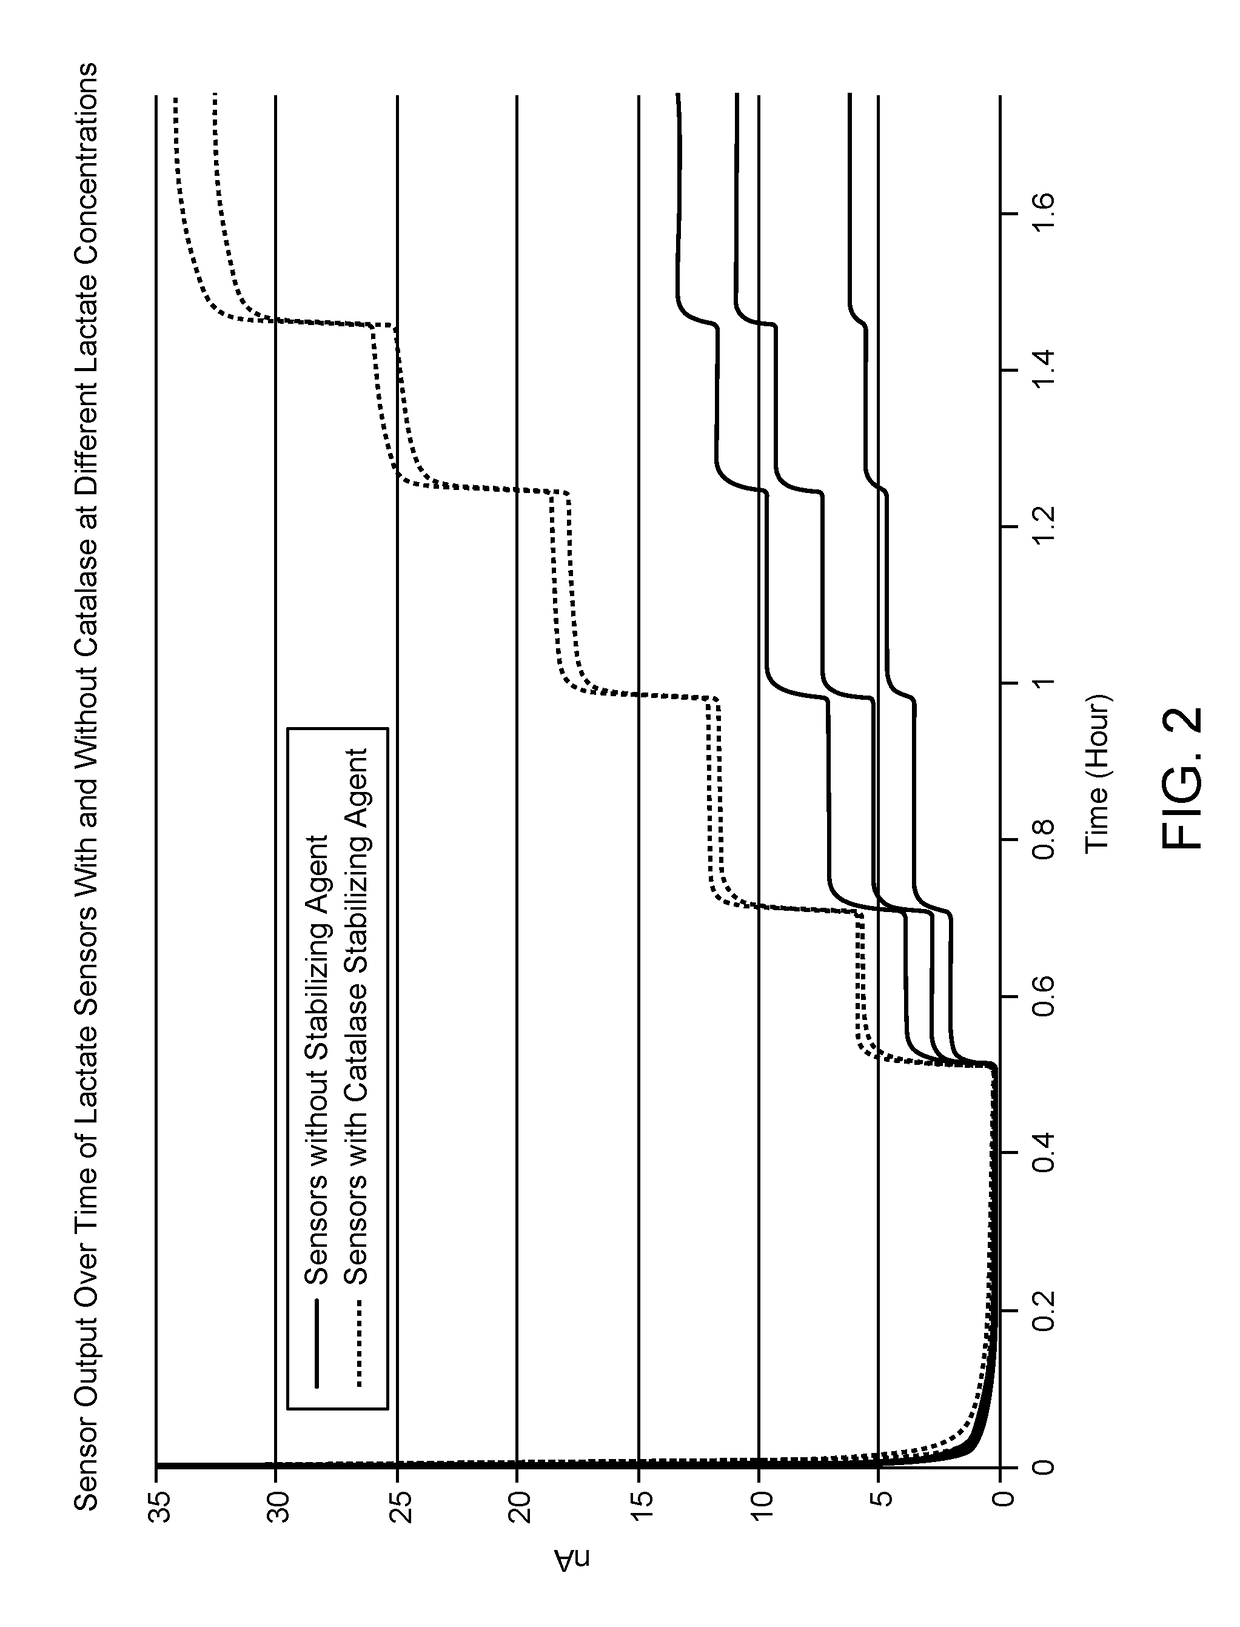 Stabilized lactate responsive enzymes, electrodes and sensors, and methods for making and using the same